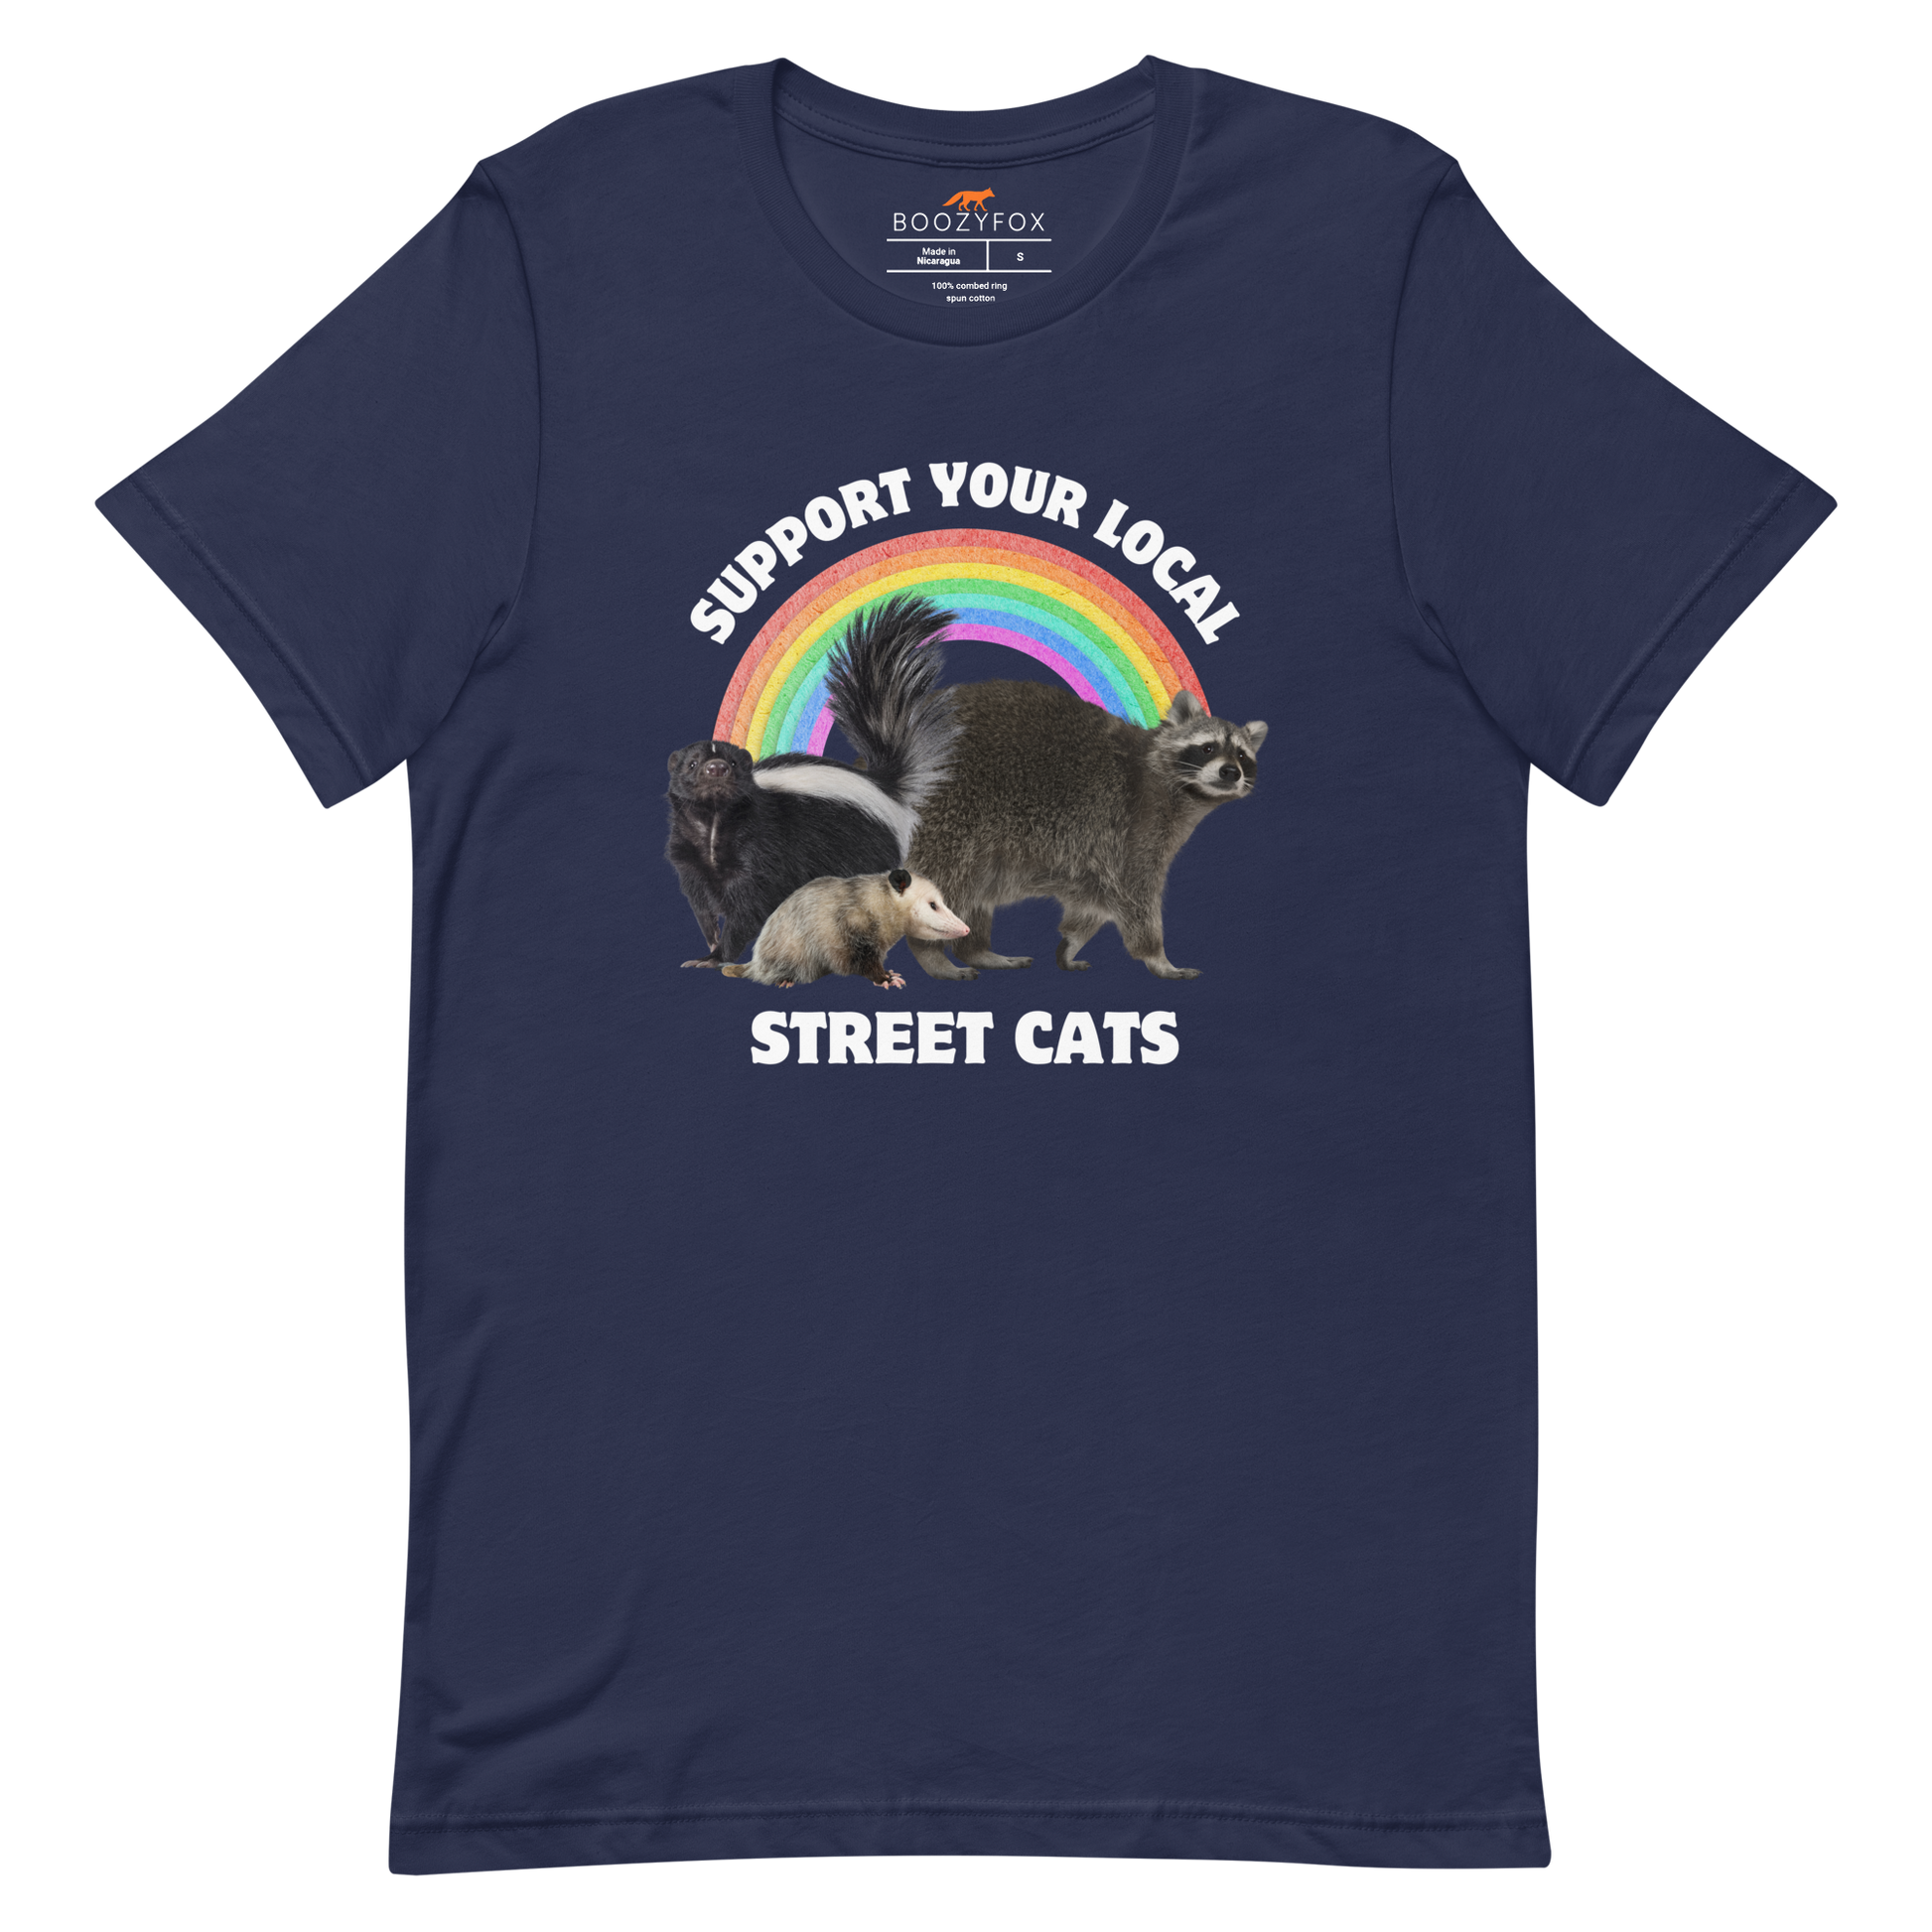 Navy Premium Street Cats Tee featuring a funny 'Support Your Local Street Cats' graphic on the chest - Funny Graphic Animal Tees - Boozy Fox